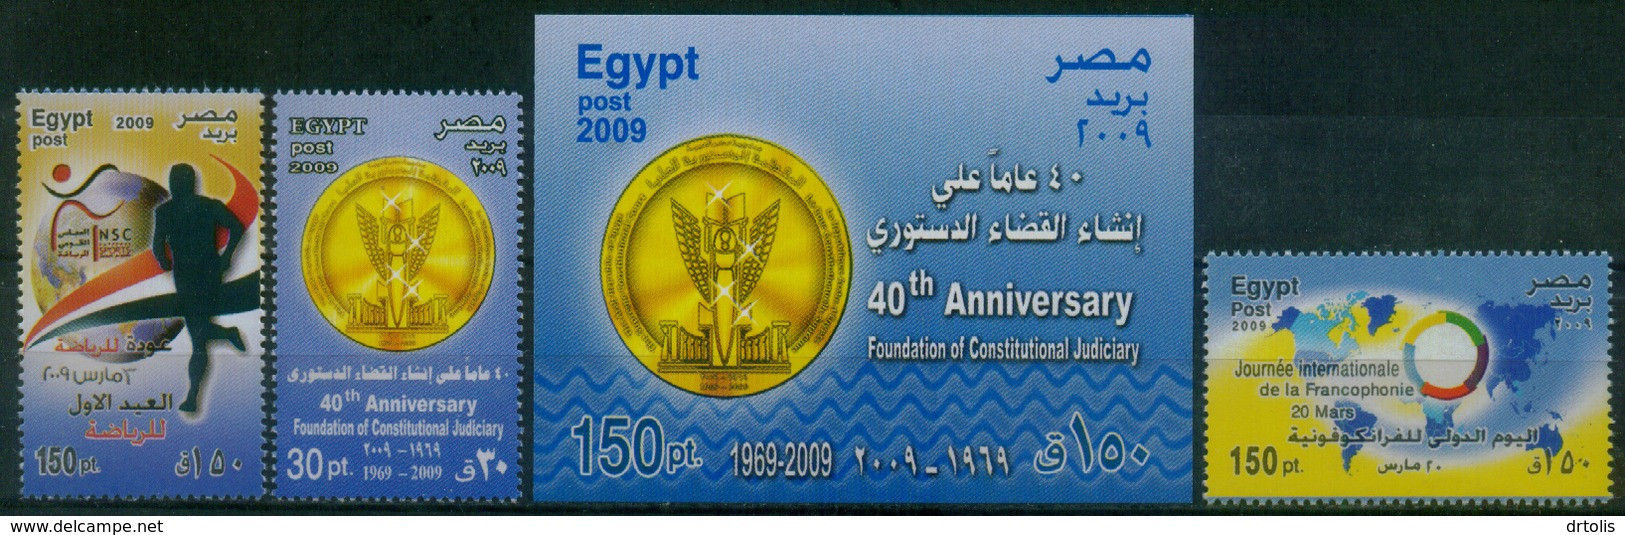 EGYPT / 2009 / COMPLETE YEAR ISSUES / MNH / VF / 7 SCANS . - Neufs